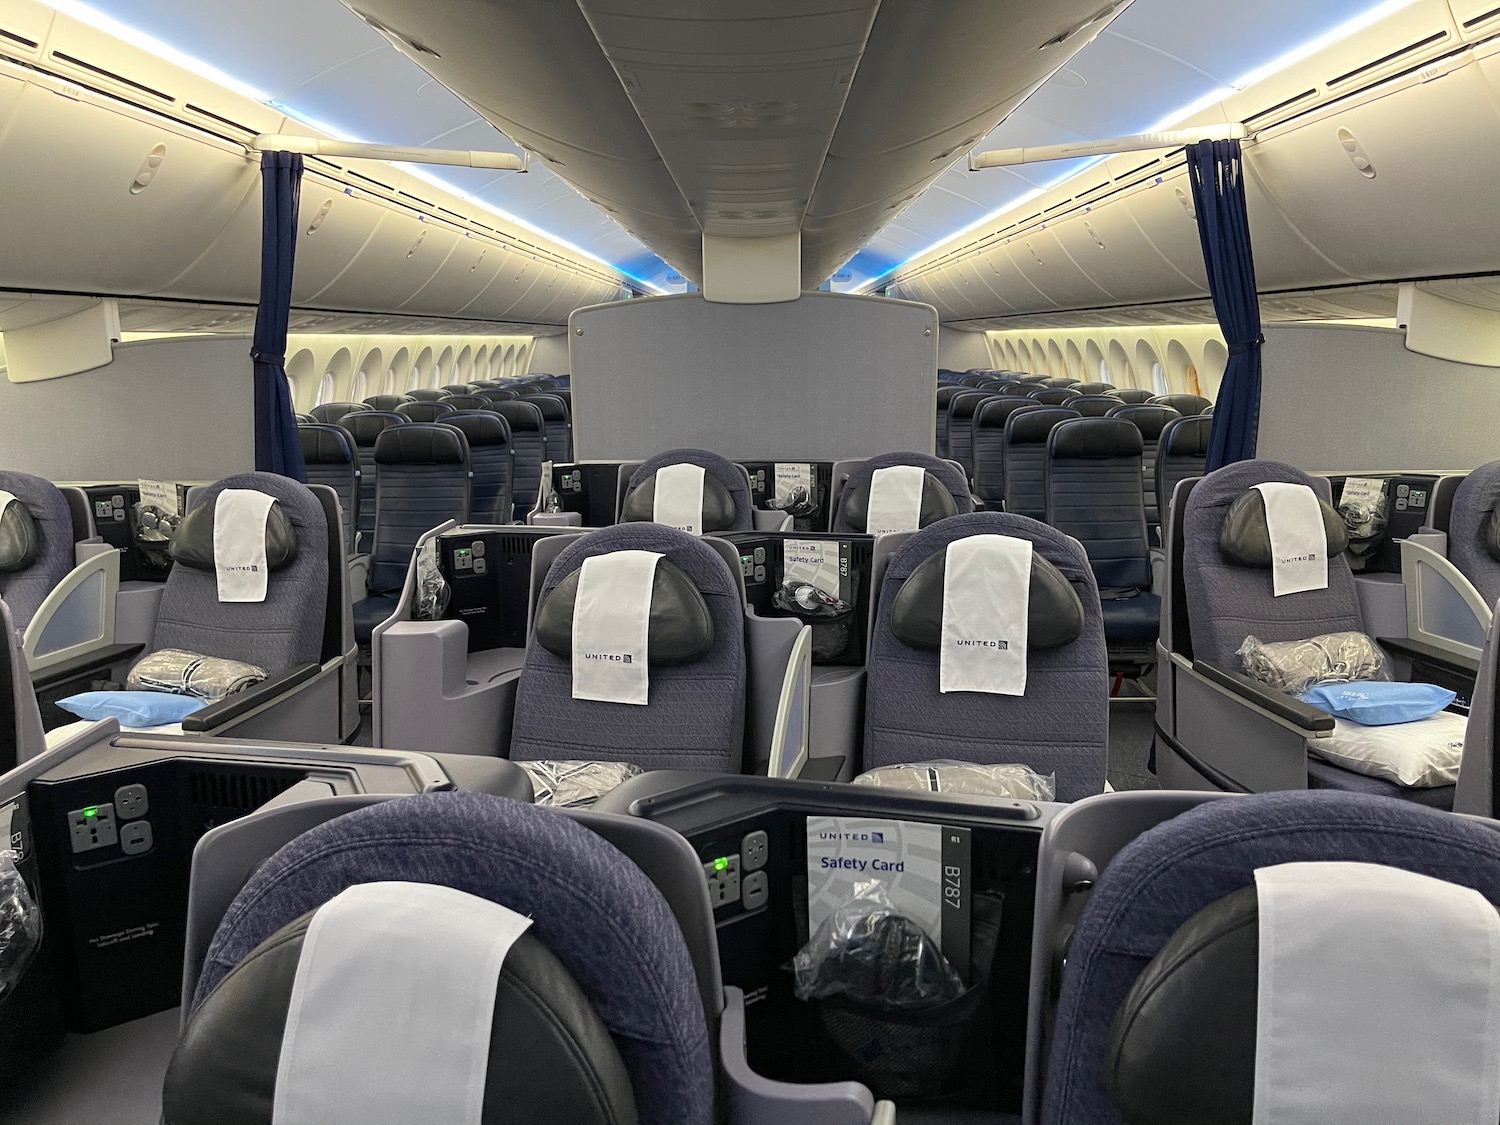 a plane with seats and a blue curtain